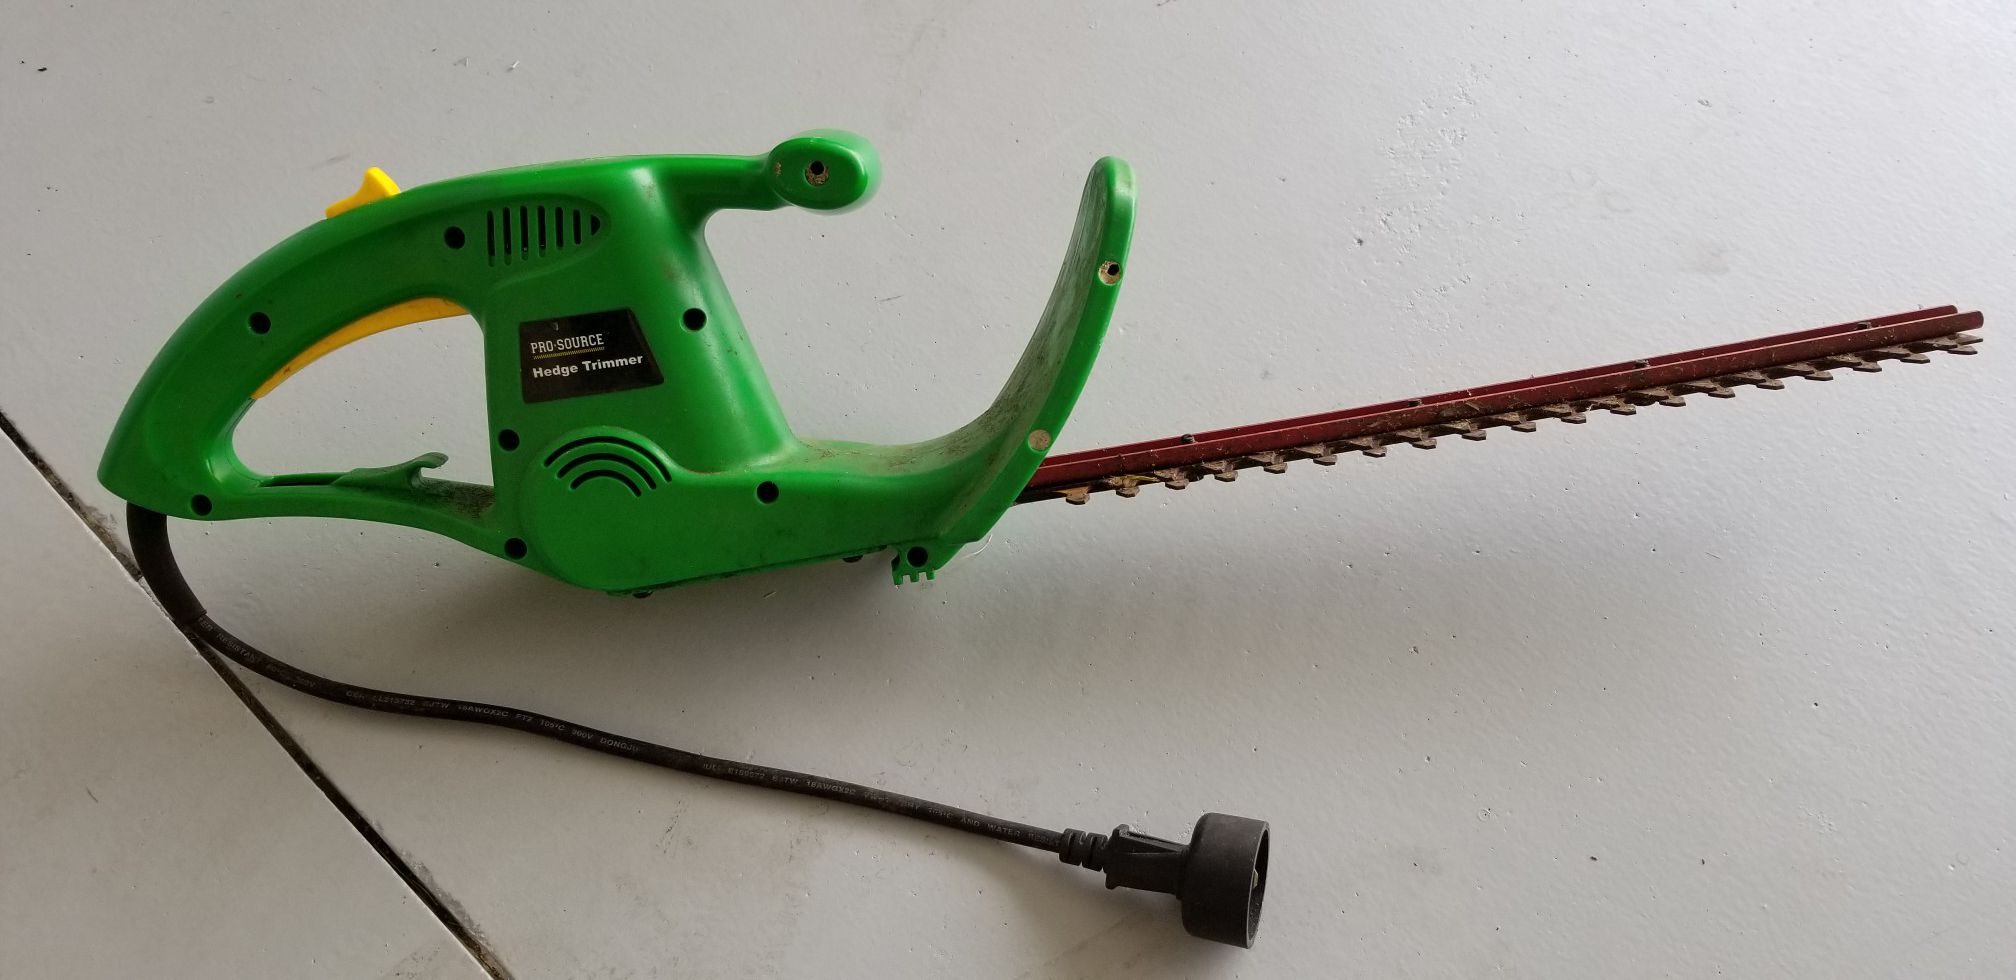 Pro-source hedge trimmer